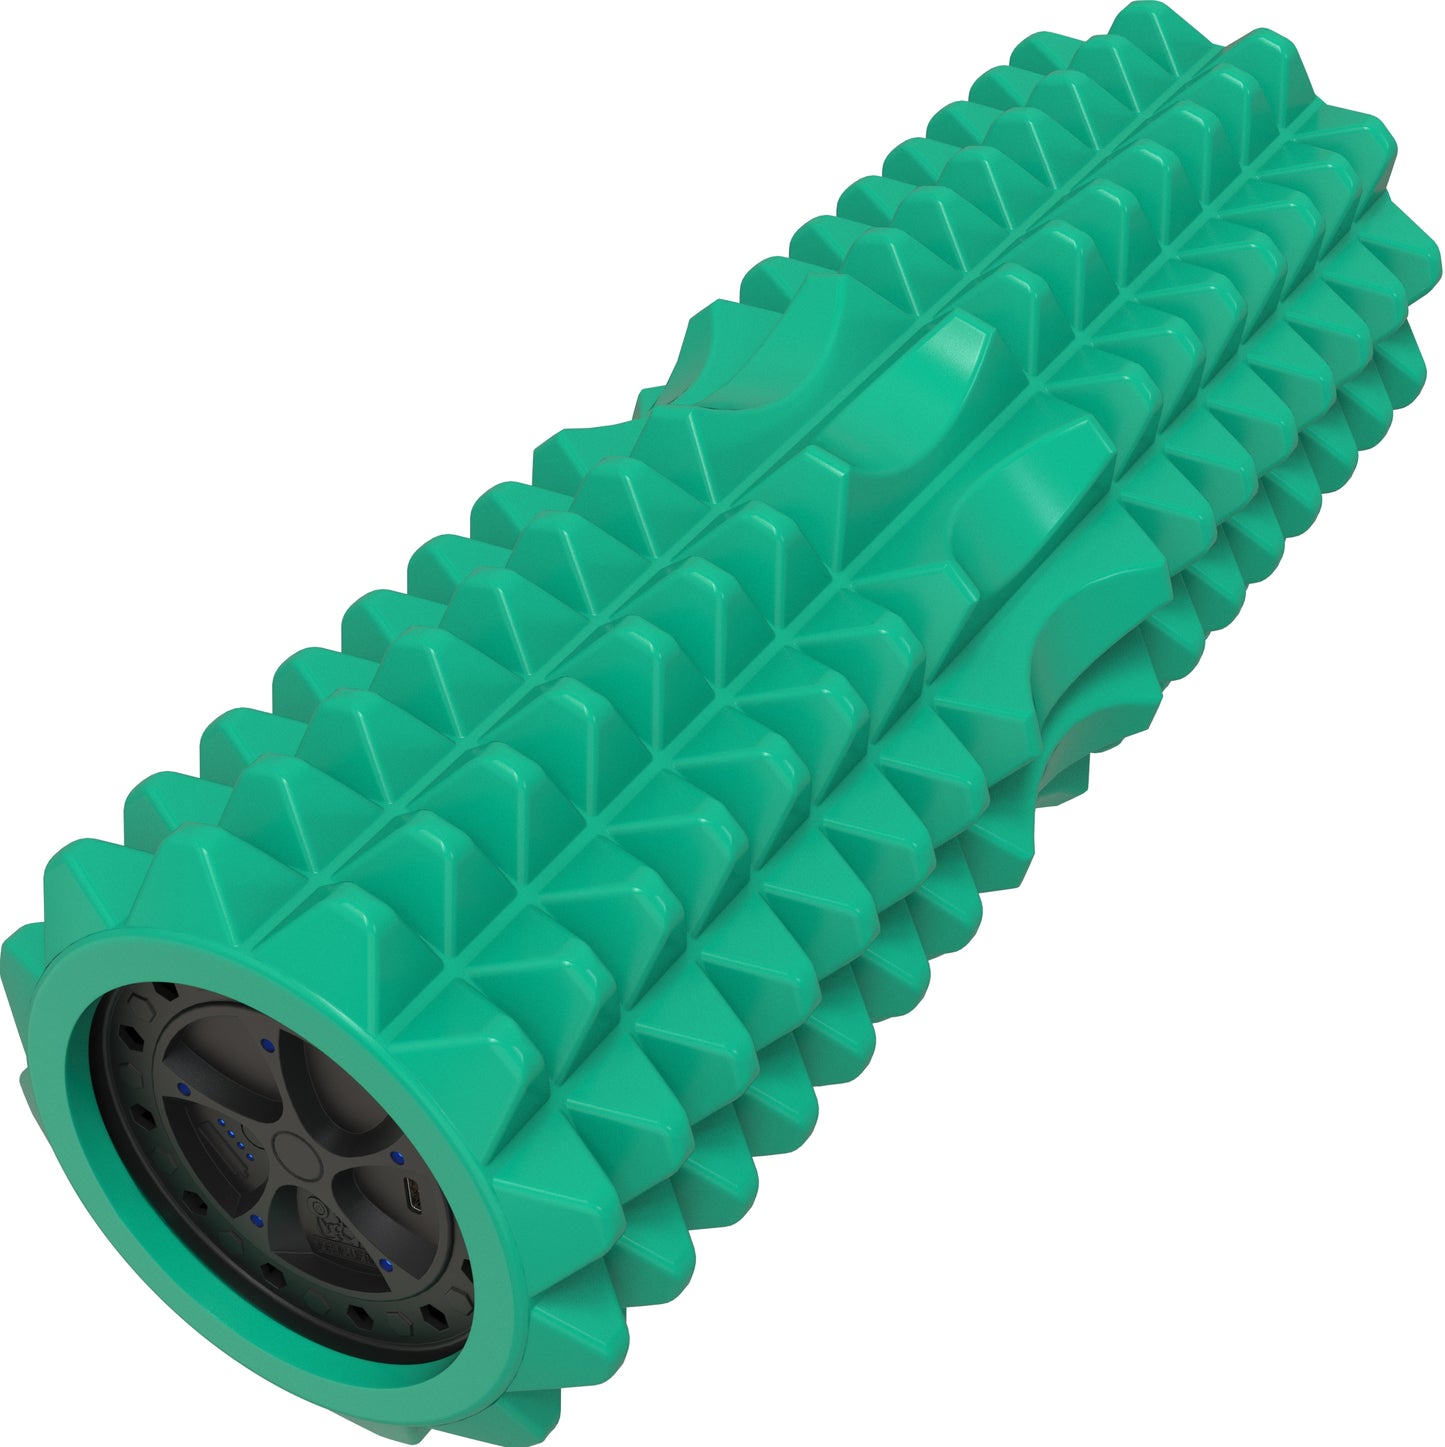 Vibrating Foam Roller - Ergonomic Trigger Point Roller for Fitness and Recovery - by Nordic Lifting